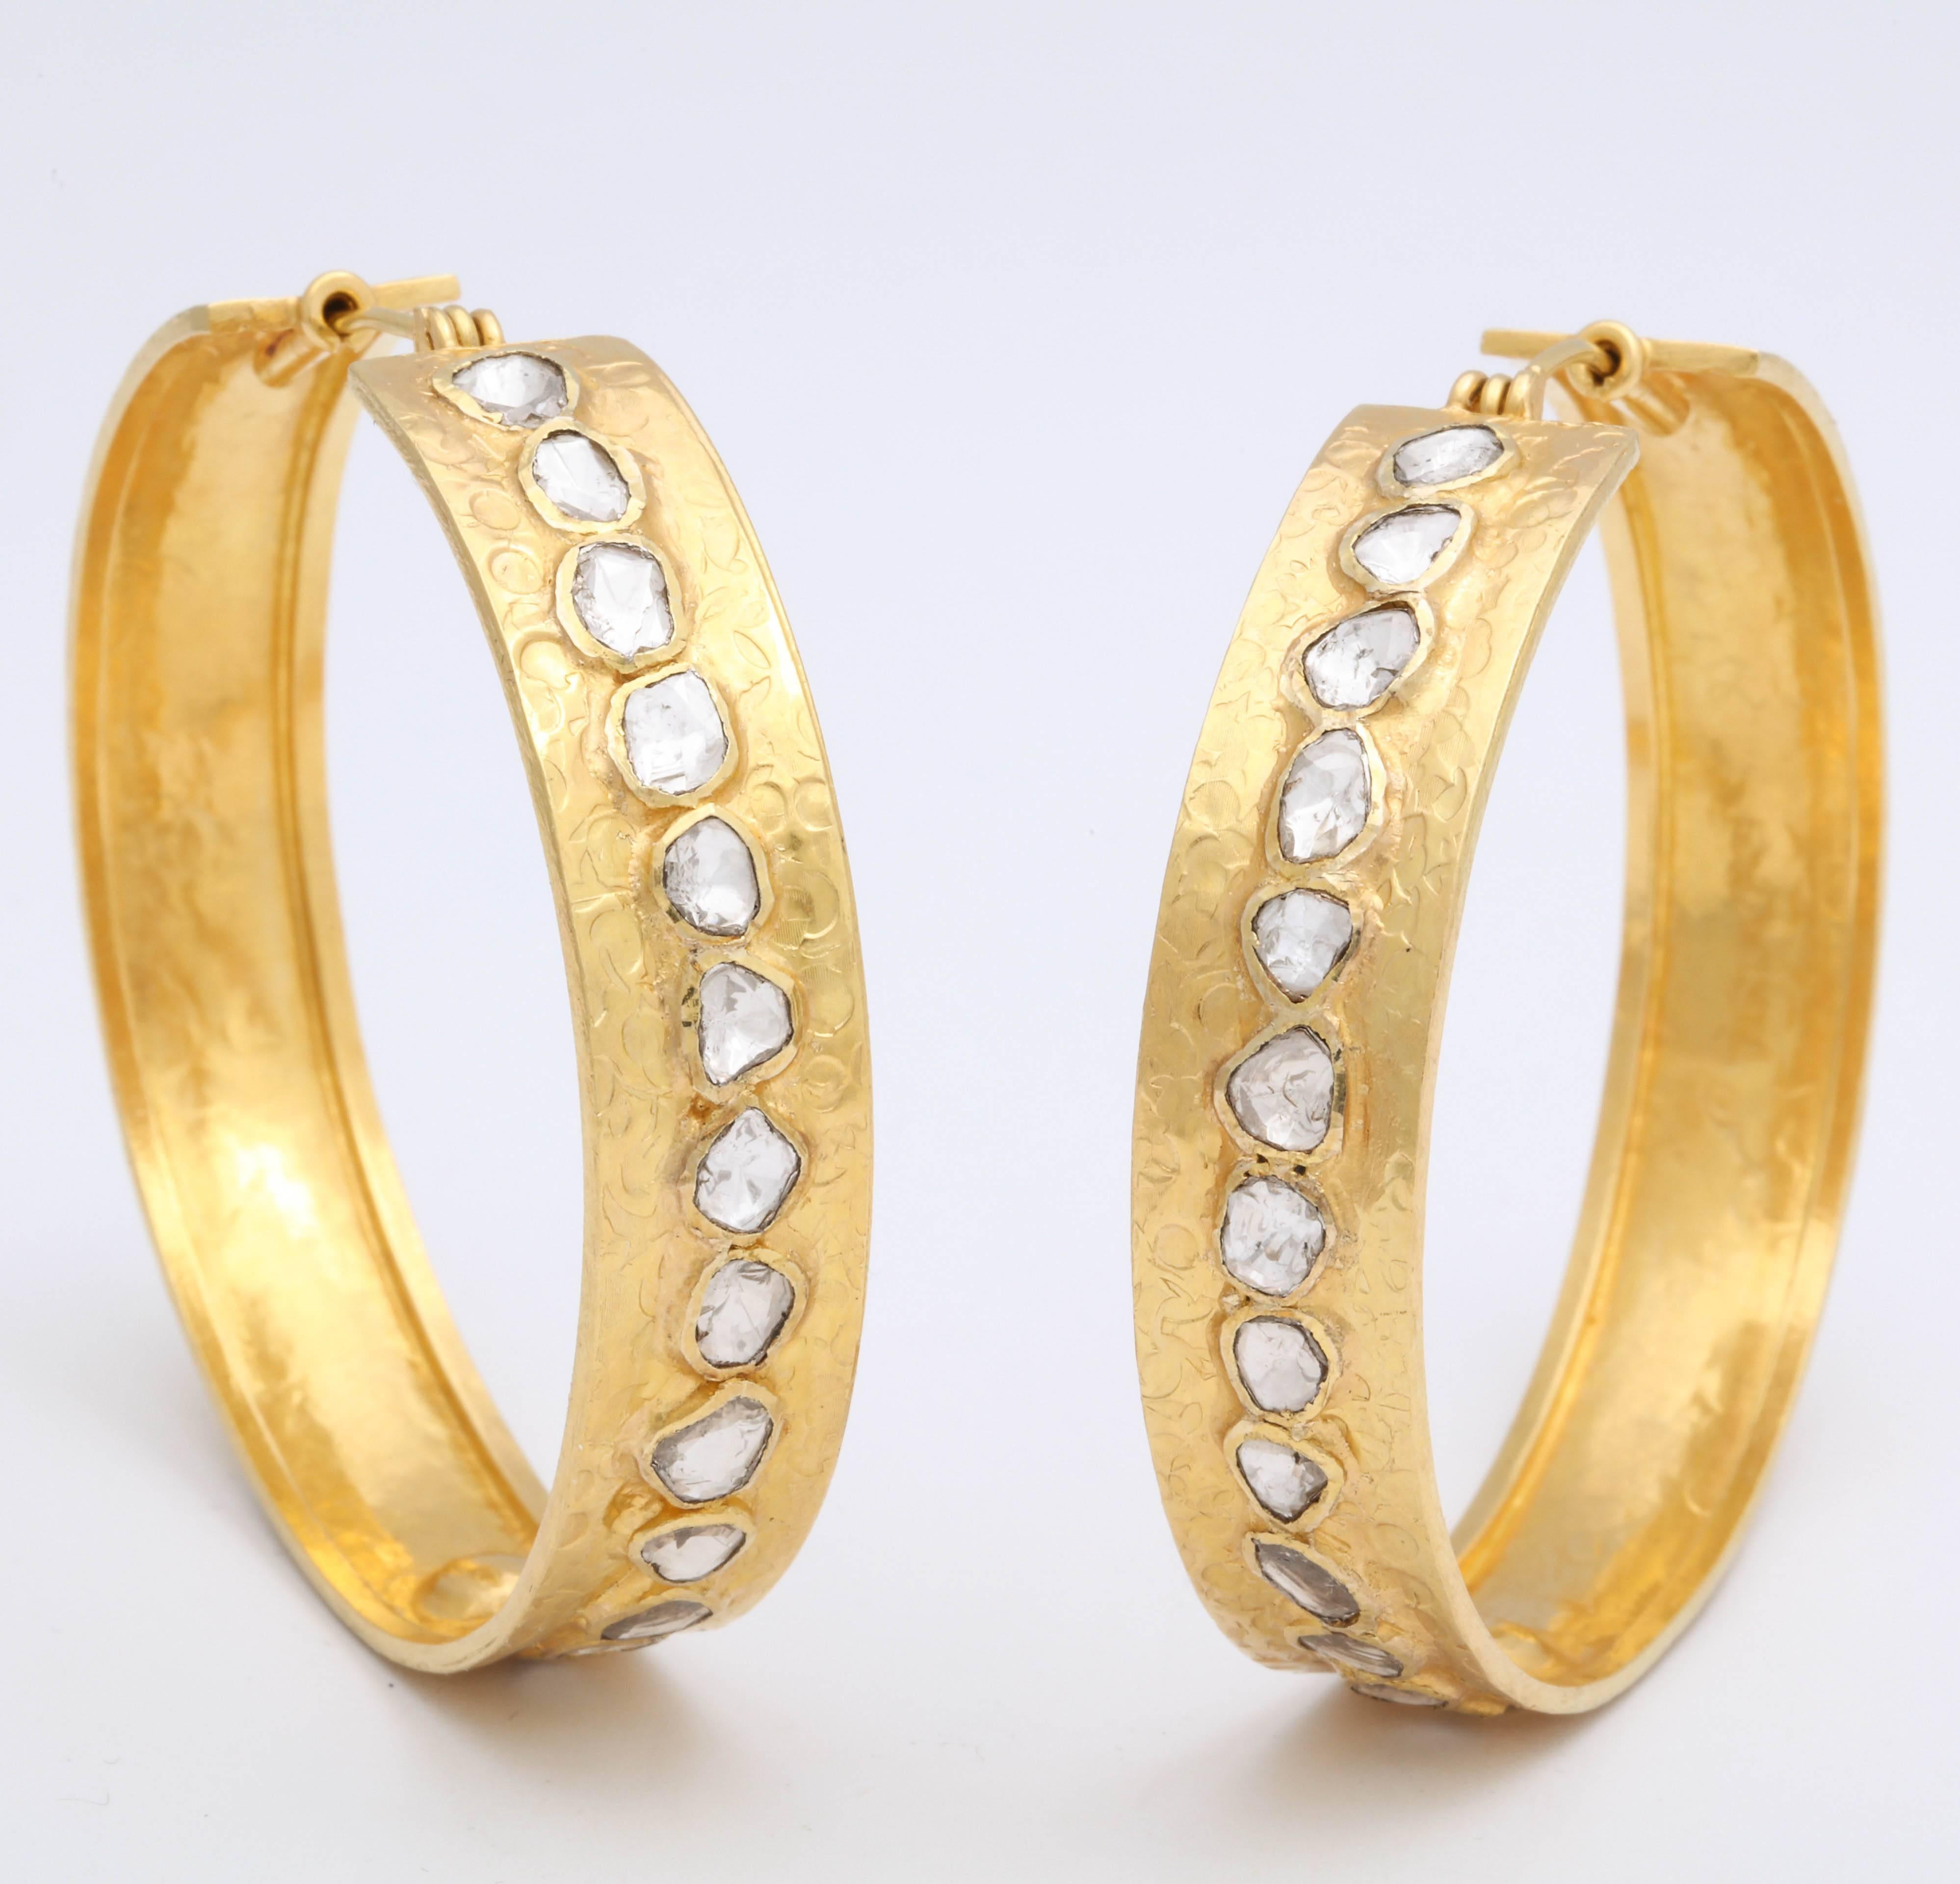 A pair of 18kt yellow gold and portrait diamond hoops. There are 28 diamonds weighing approximately 4.12cts.
Height: 1.95 inches
Width: 2.25 inches